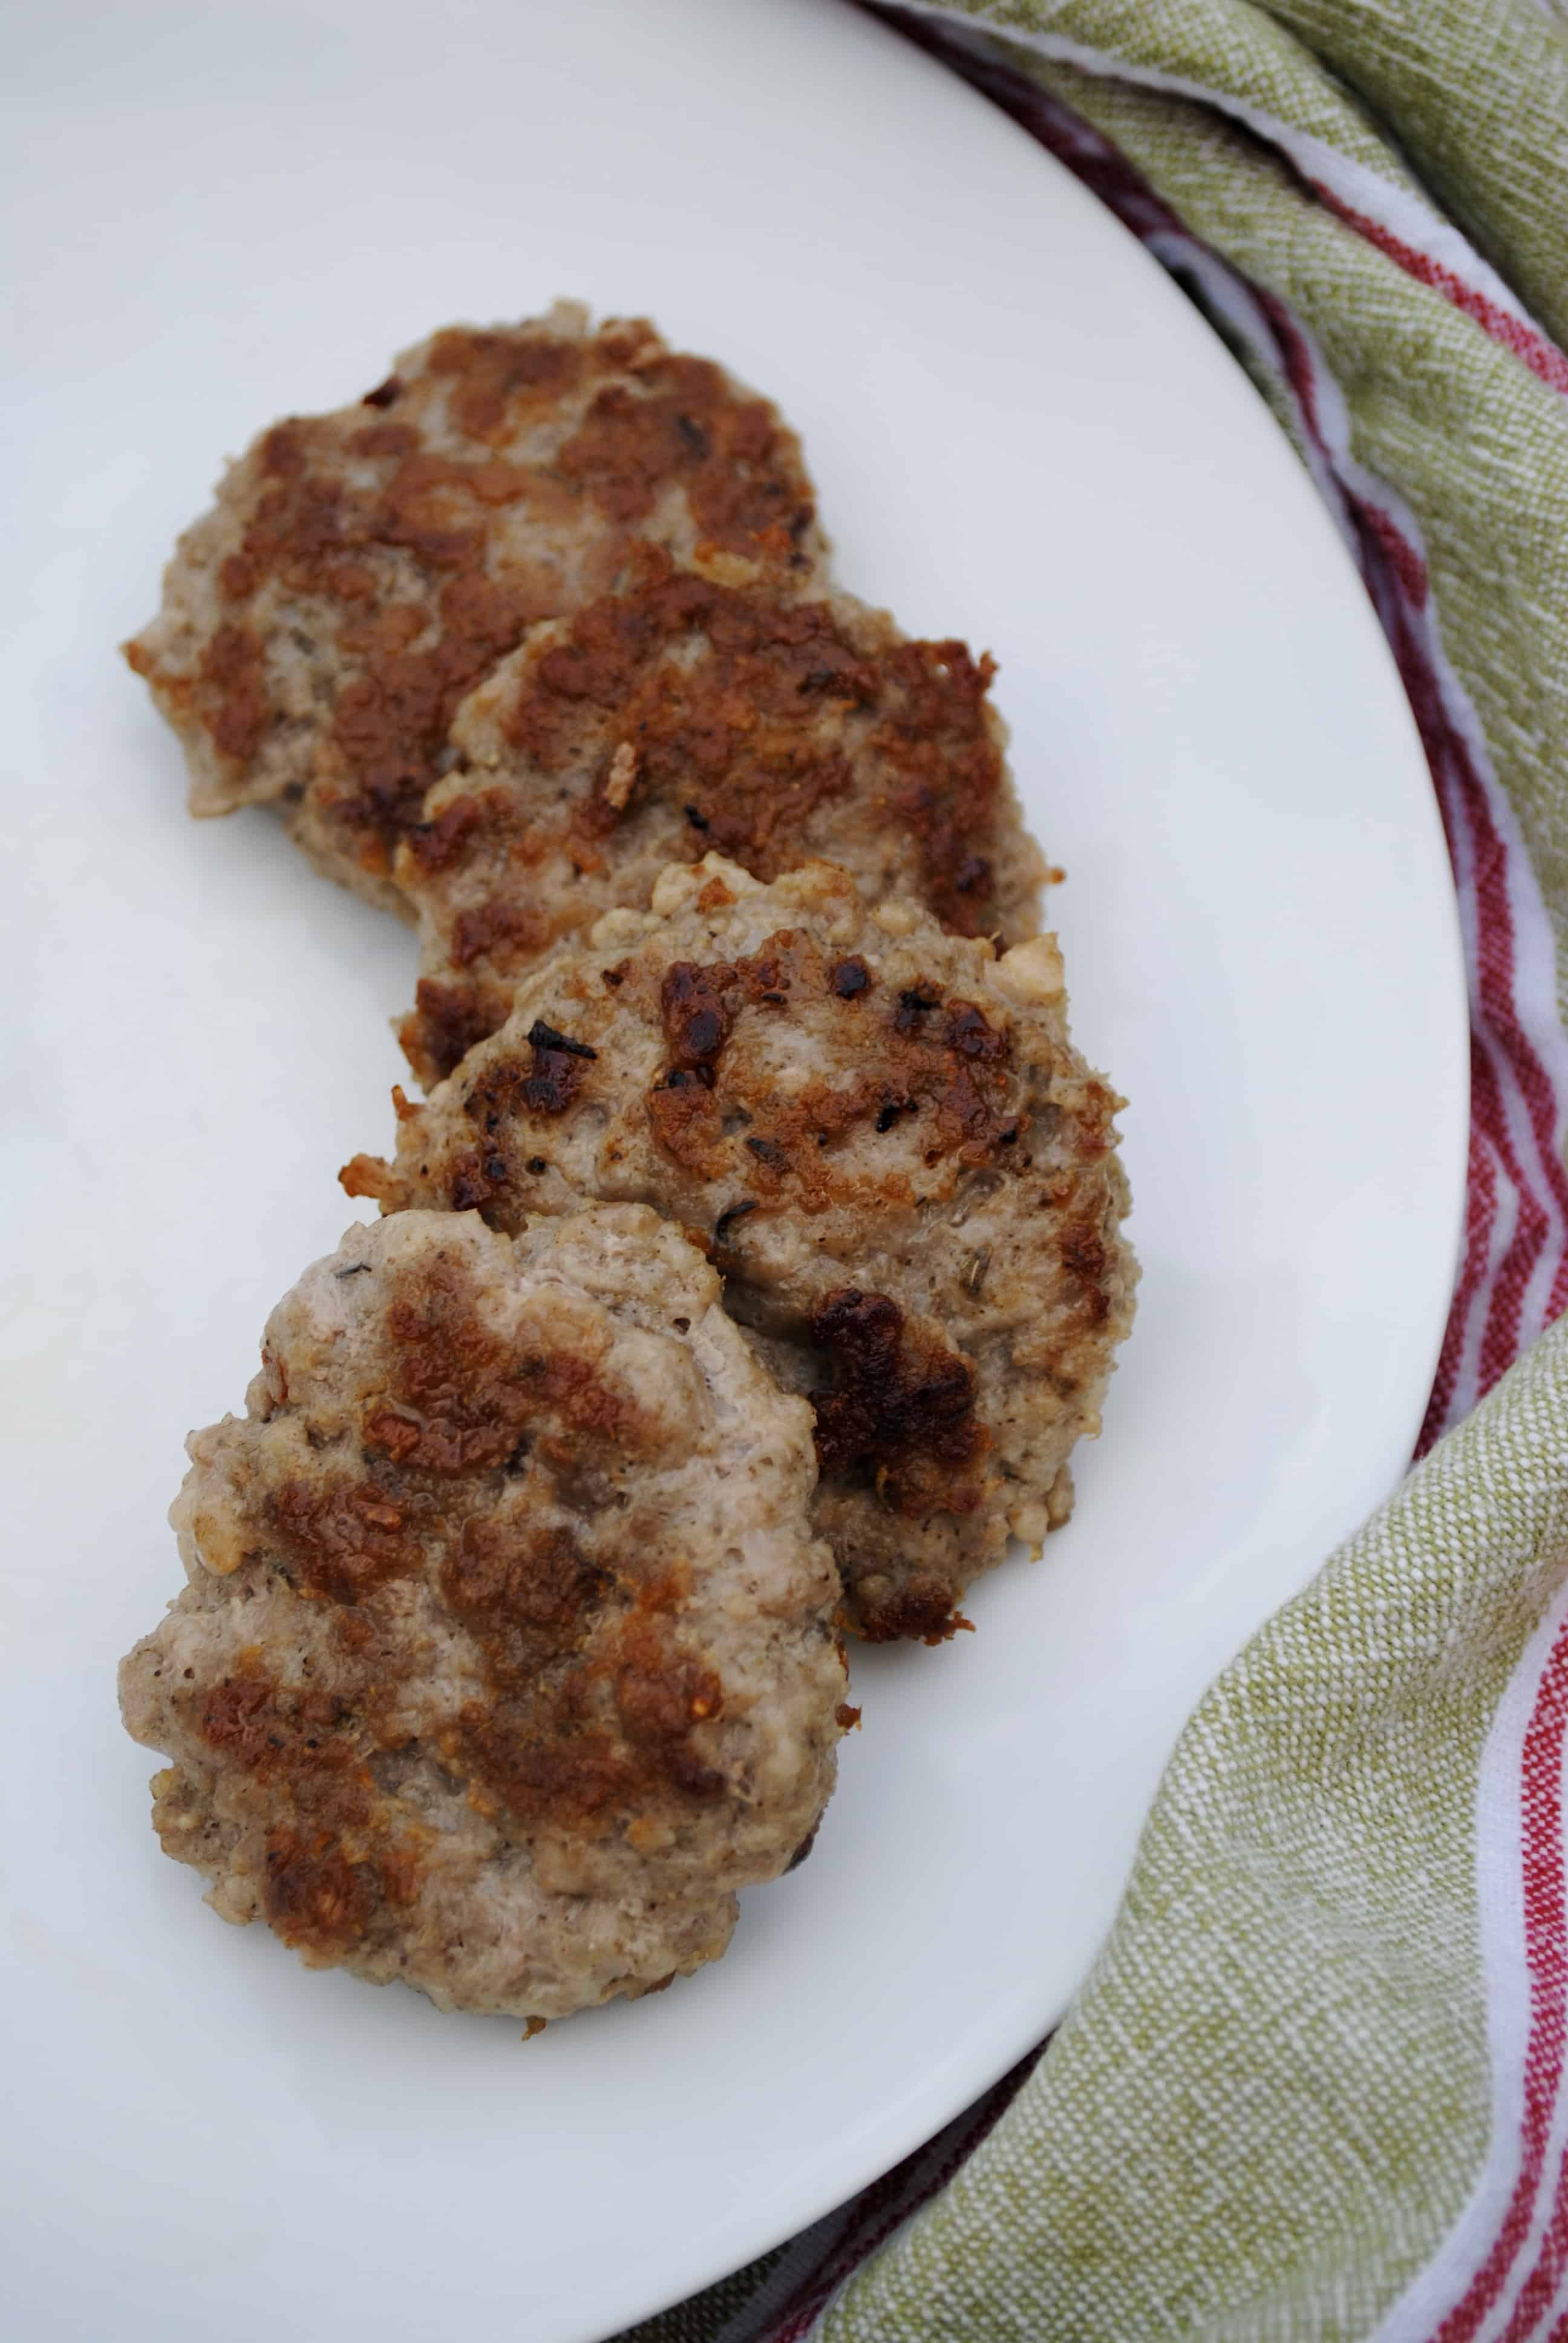 Homemade breakfast sausage seasoning. A clean alternative that you can feel good about feeding your family.